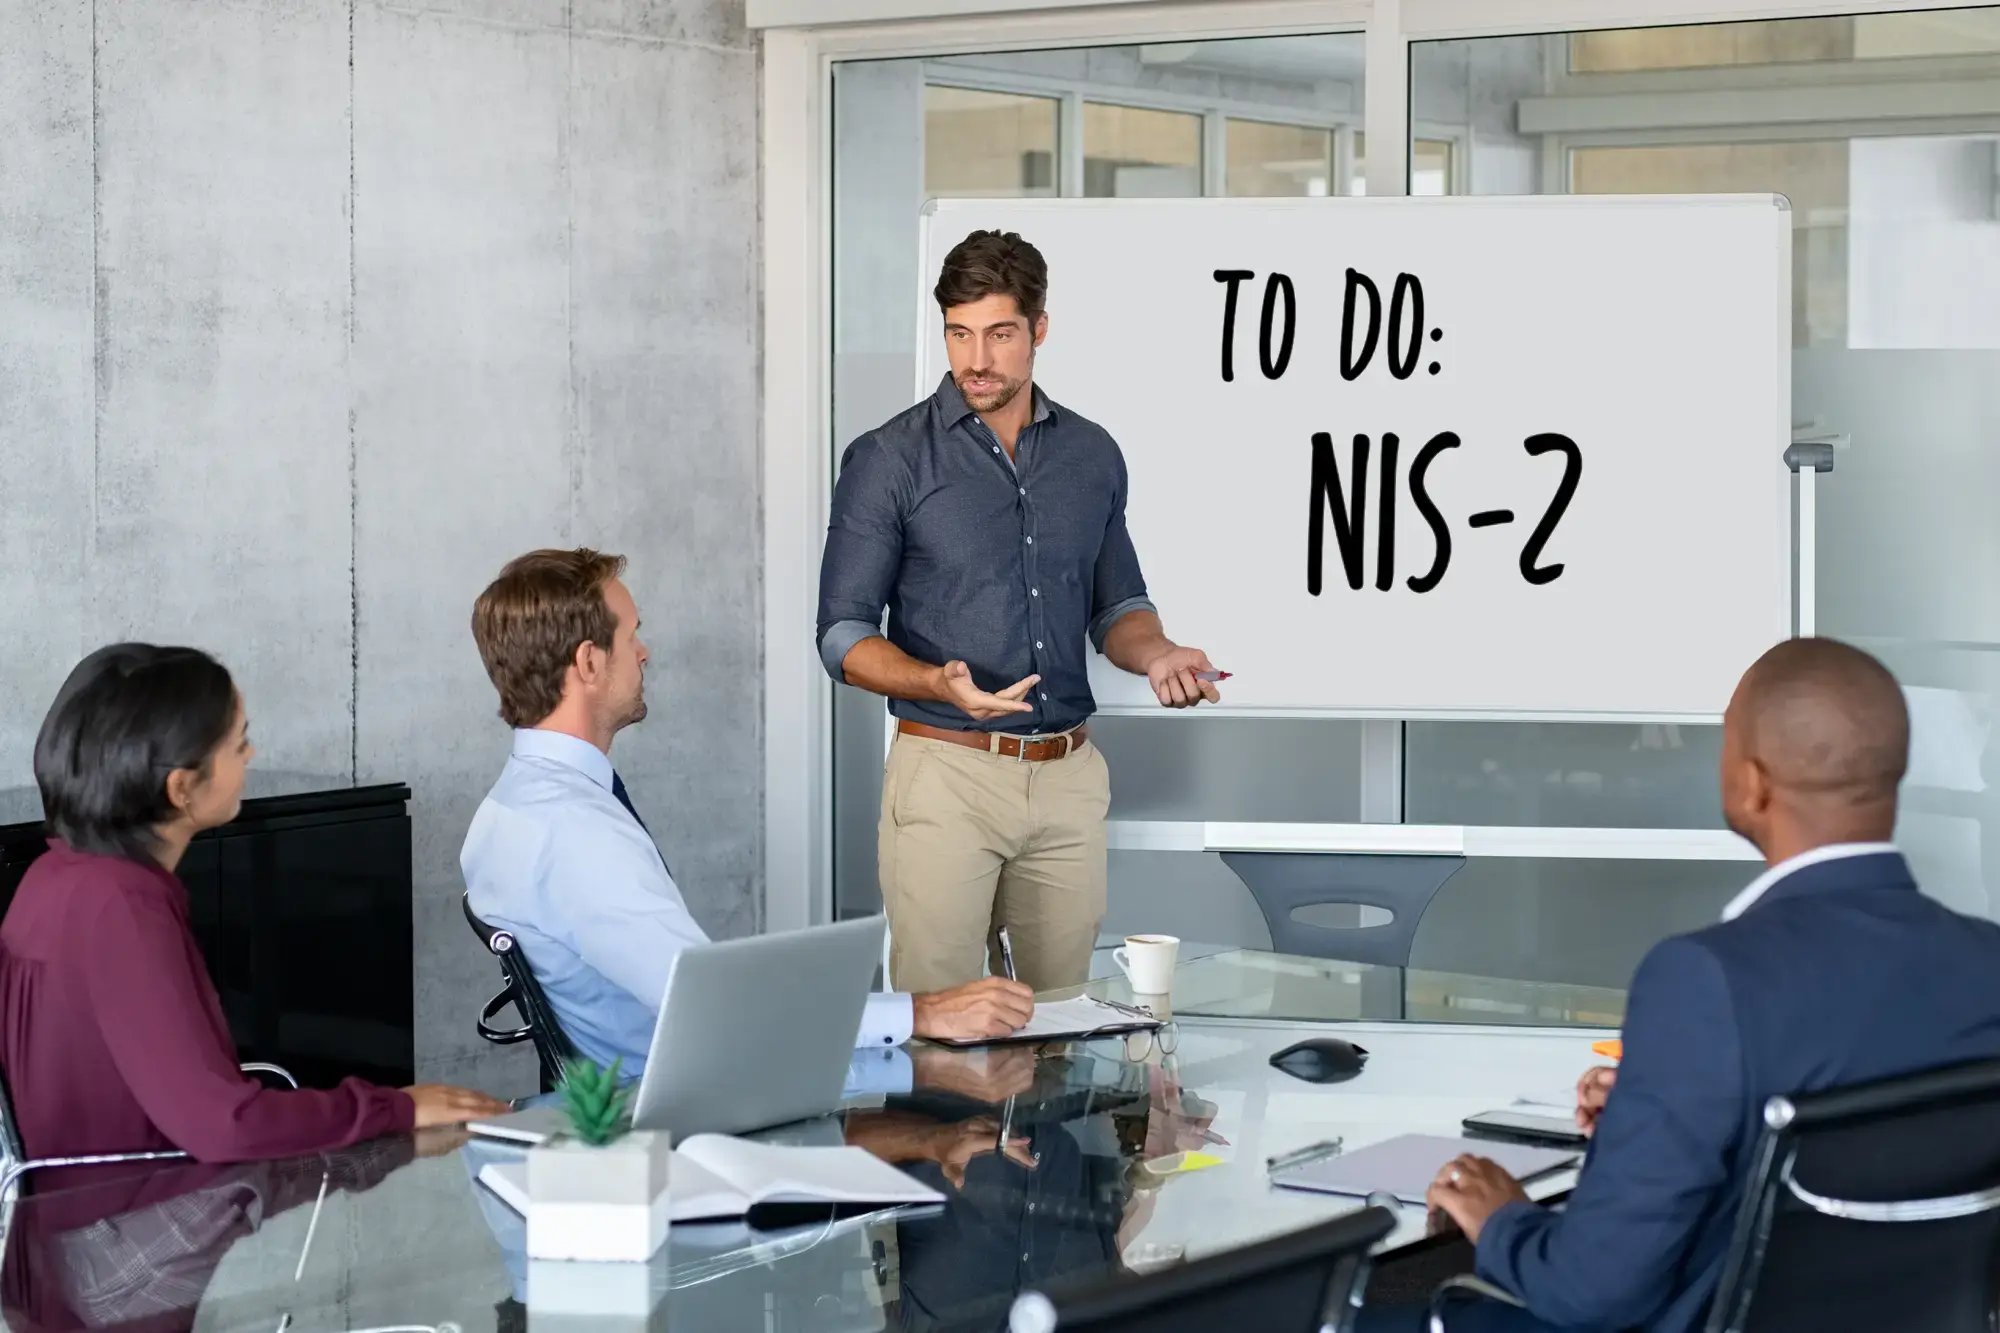 nis2-consulting-header2